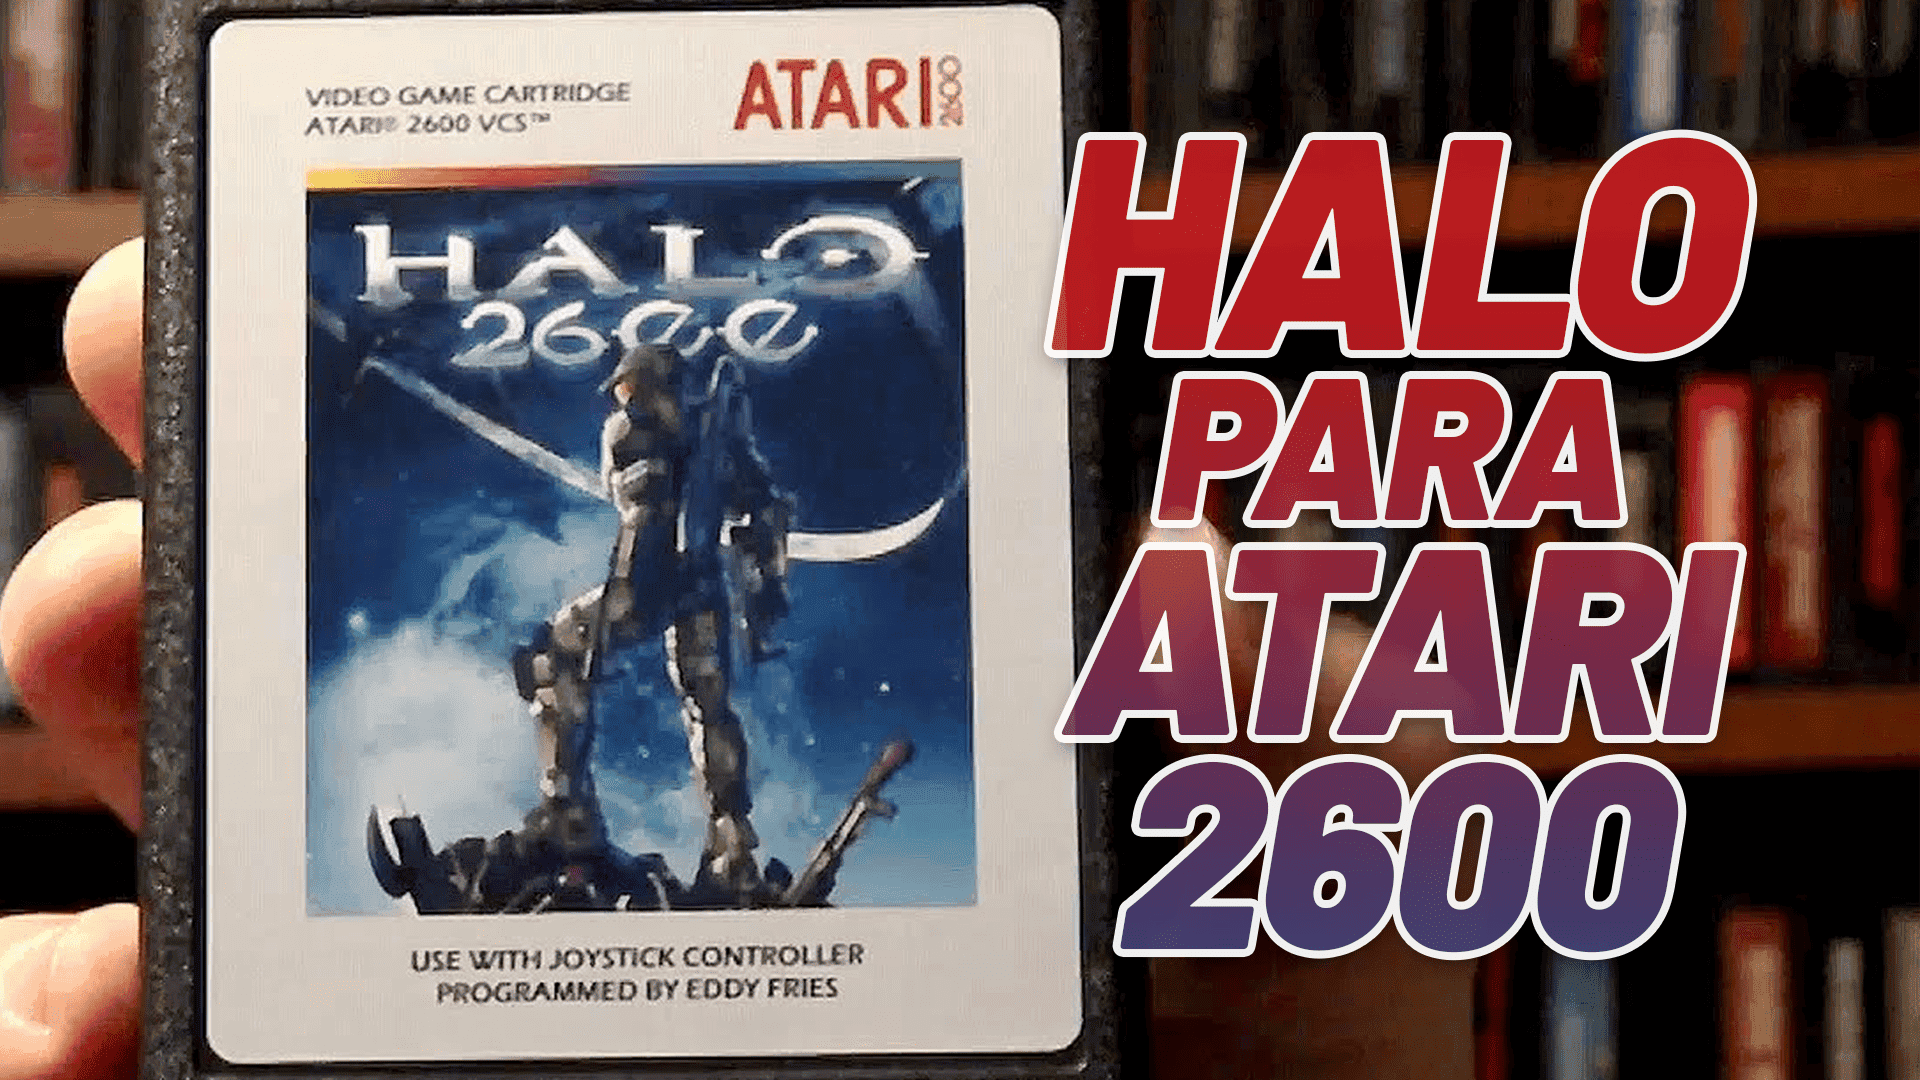 Did you know that Halo was also released on the Atari 2600?  No, it’s not a joke